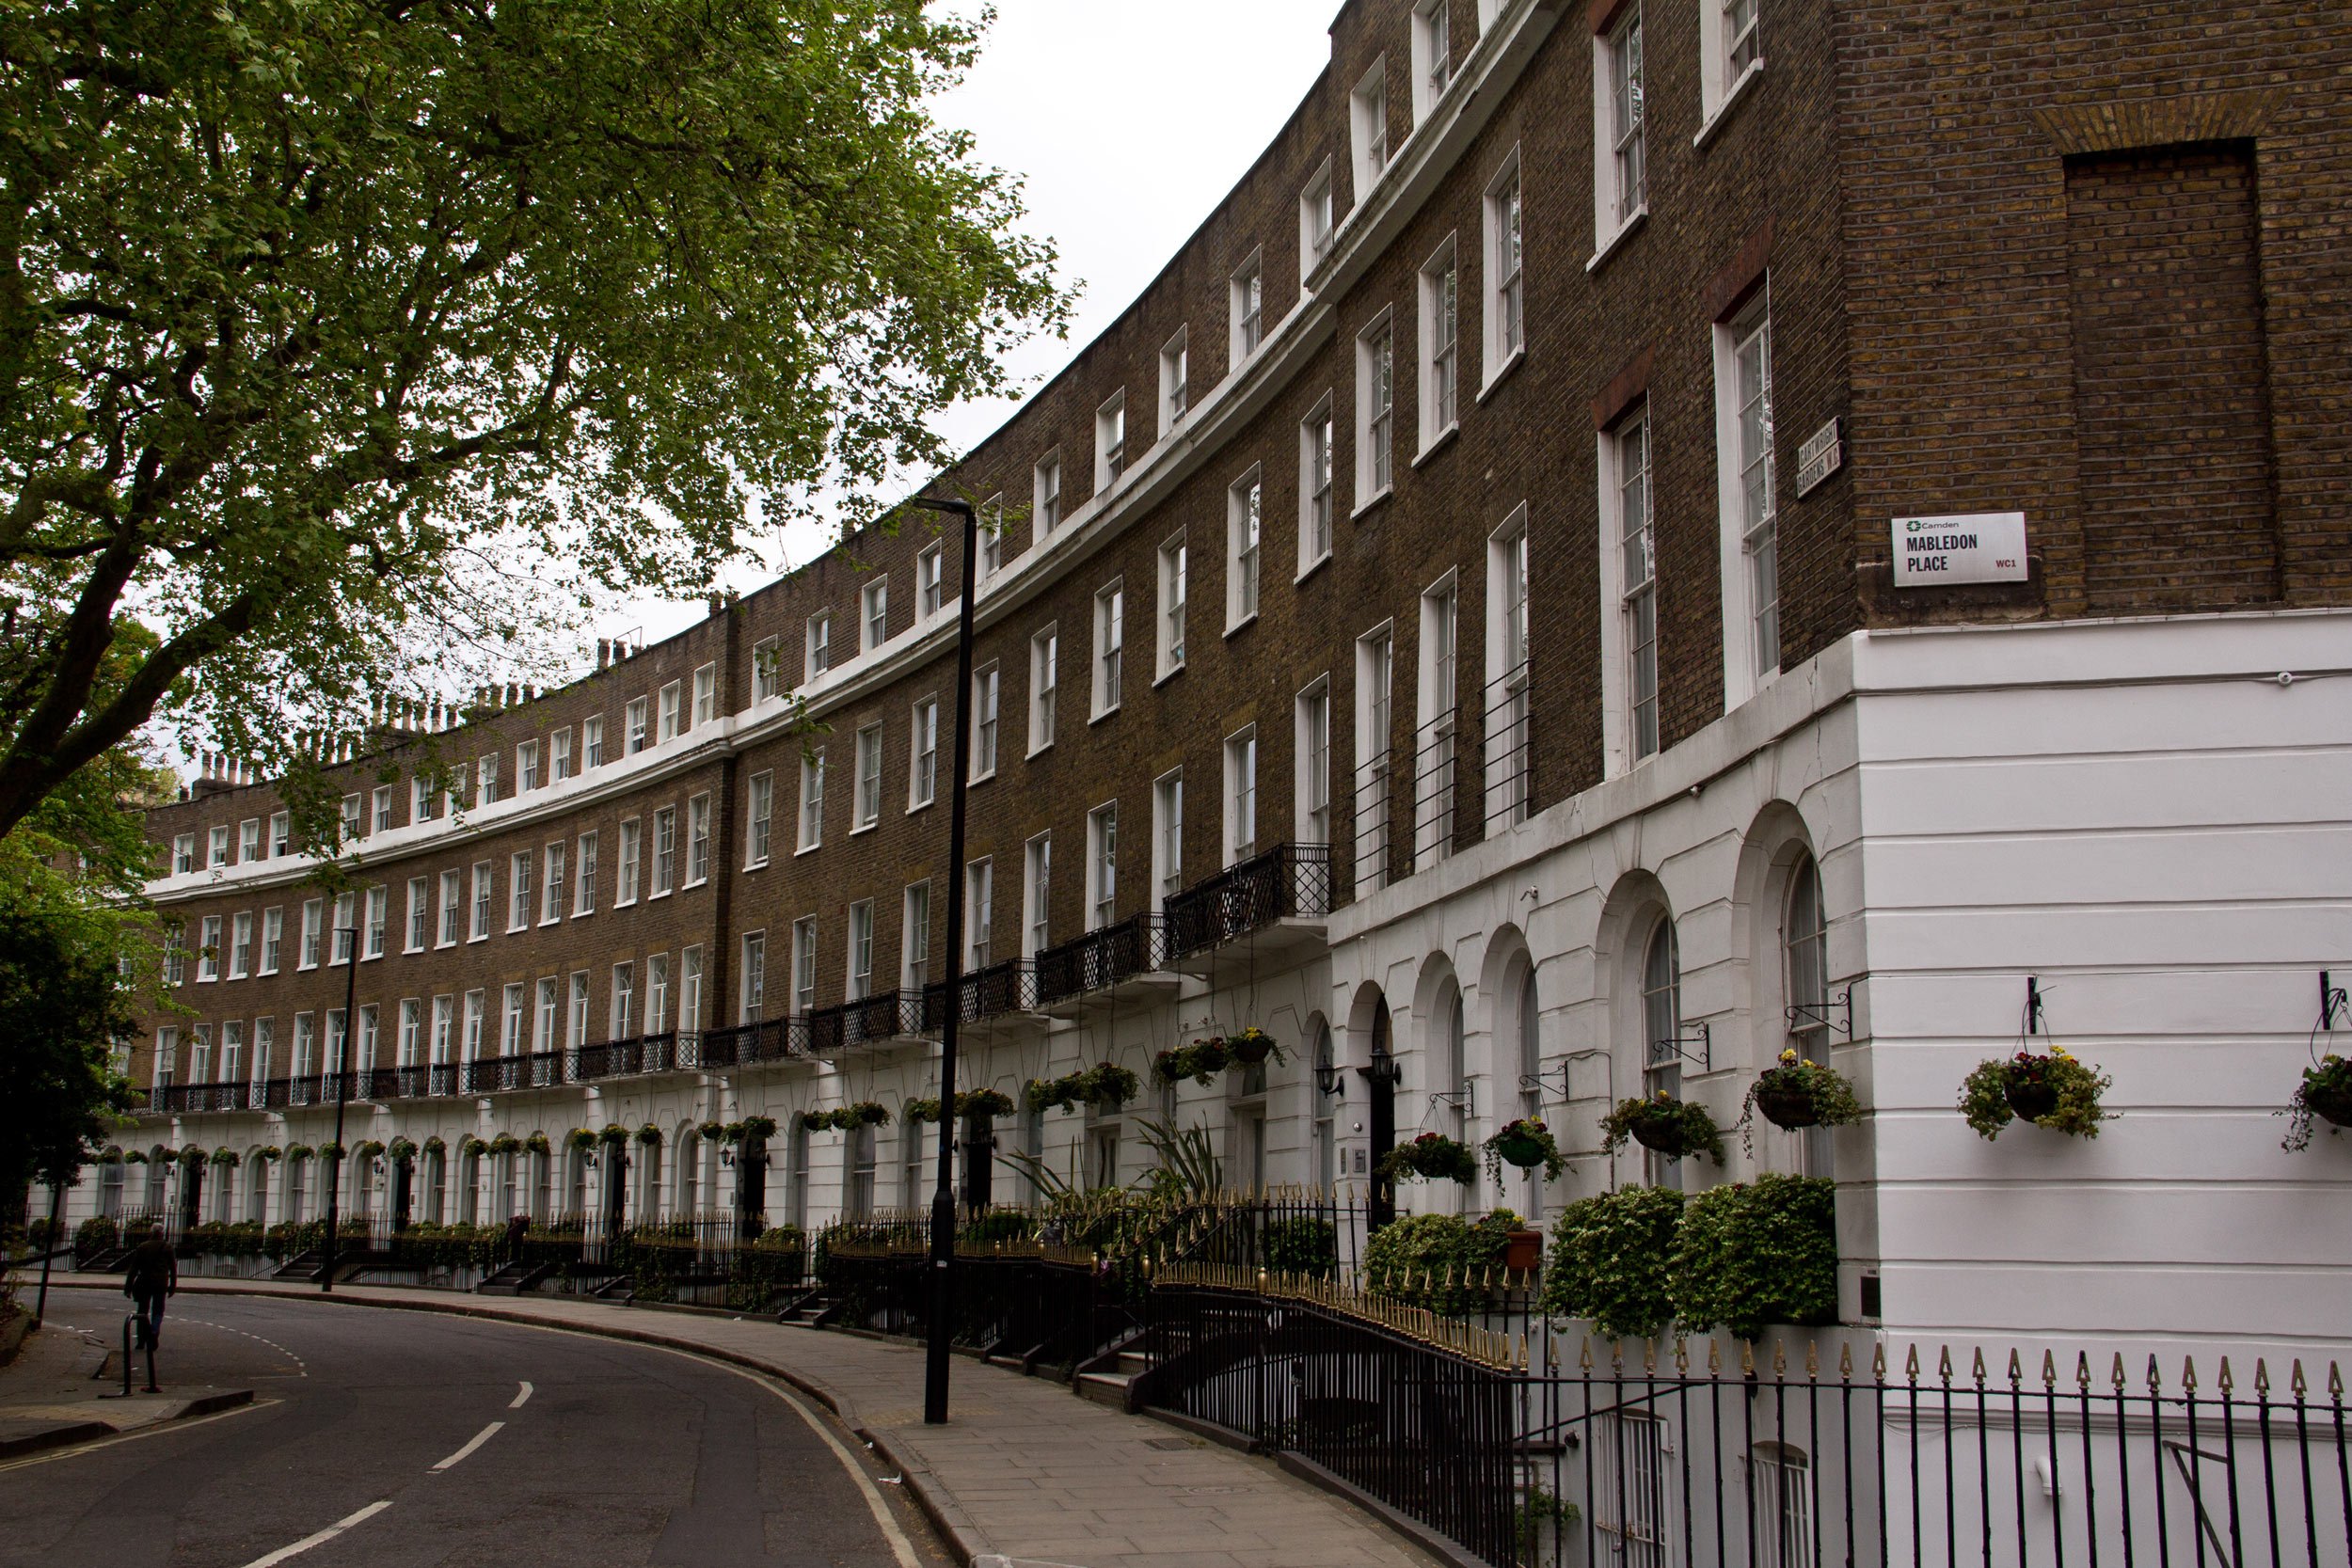 row-of-apartment-houses-in-london-england